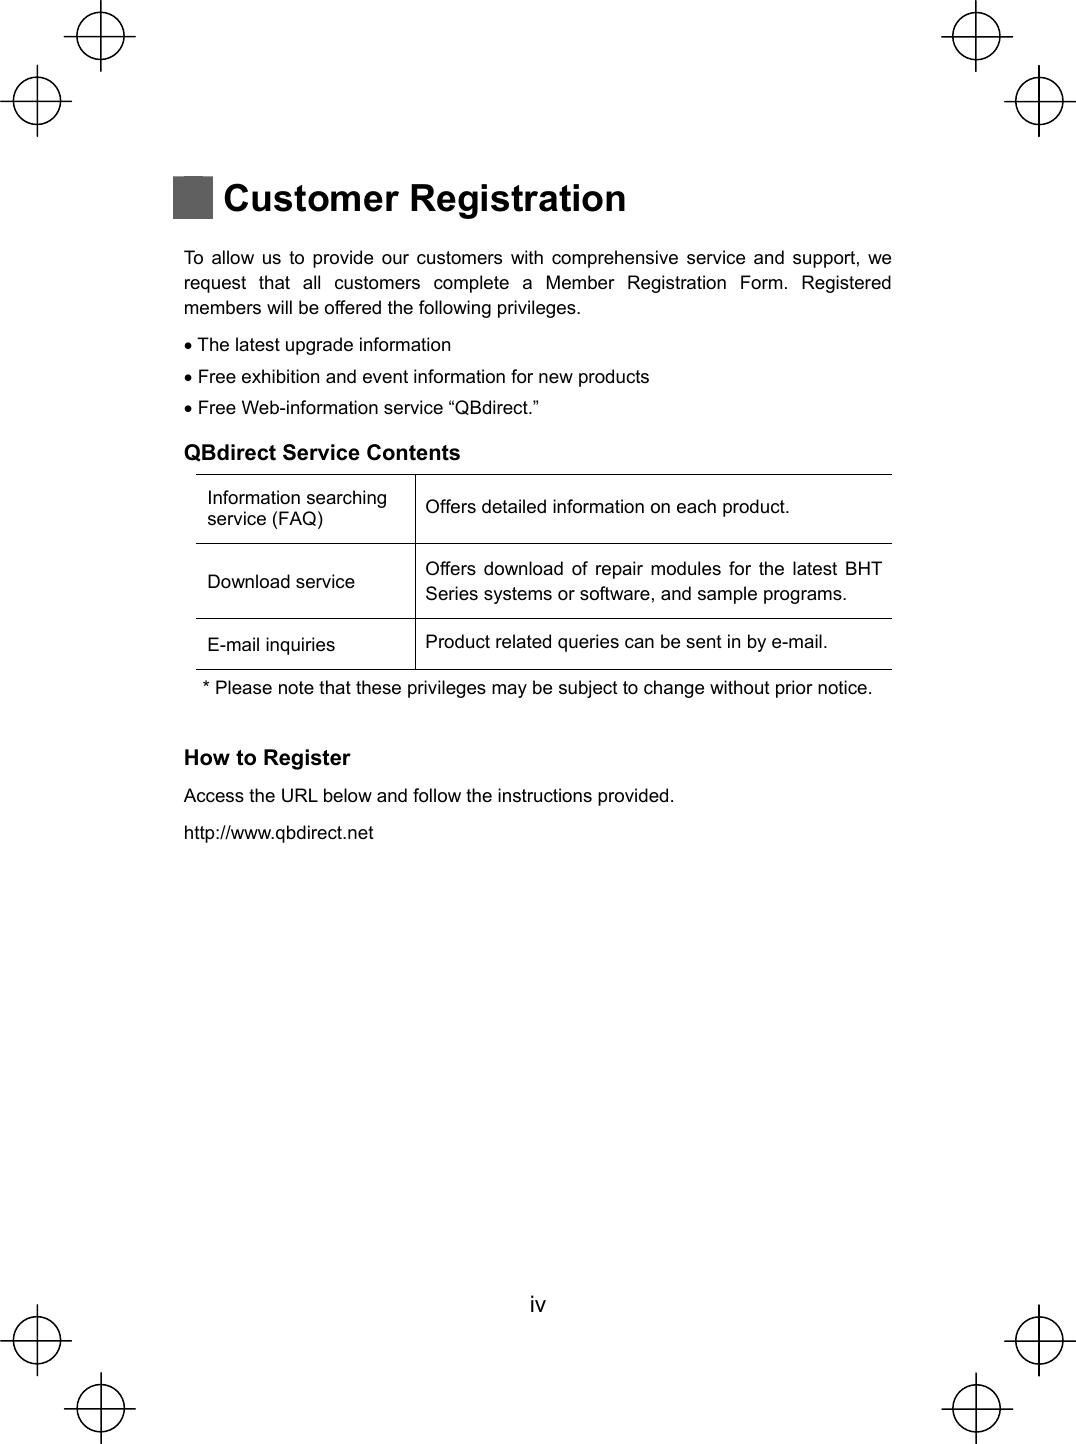  iv   Customer Registration  To allow us to provide our customers with comprehensive service and support, we request that all customers complete a Member Registration Form. Registered members will be offered the following privileges. x The latest upgrade information x Free exhibition and event information for new products x Free Web-information service “QBdirect.” QBdirect Service Contents Information searching service (FAQ)  Offers detailed information on each product. Download service    Offers download of repair modules for the latest BHT Series systems or software, and sample programs. E-mail inquiries    Product related queries can be sent in by e-mail. * Please note that these privileges may be subject to change without prior notice.  How to Register Access the URL below and follow the instructions provided. http://www.qbdirect.net     